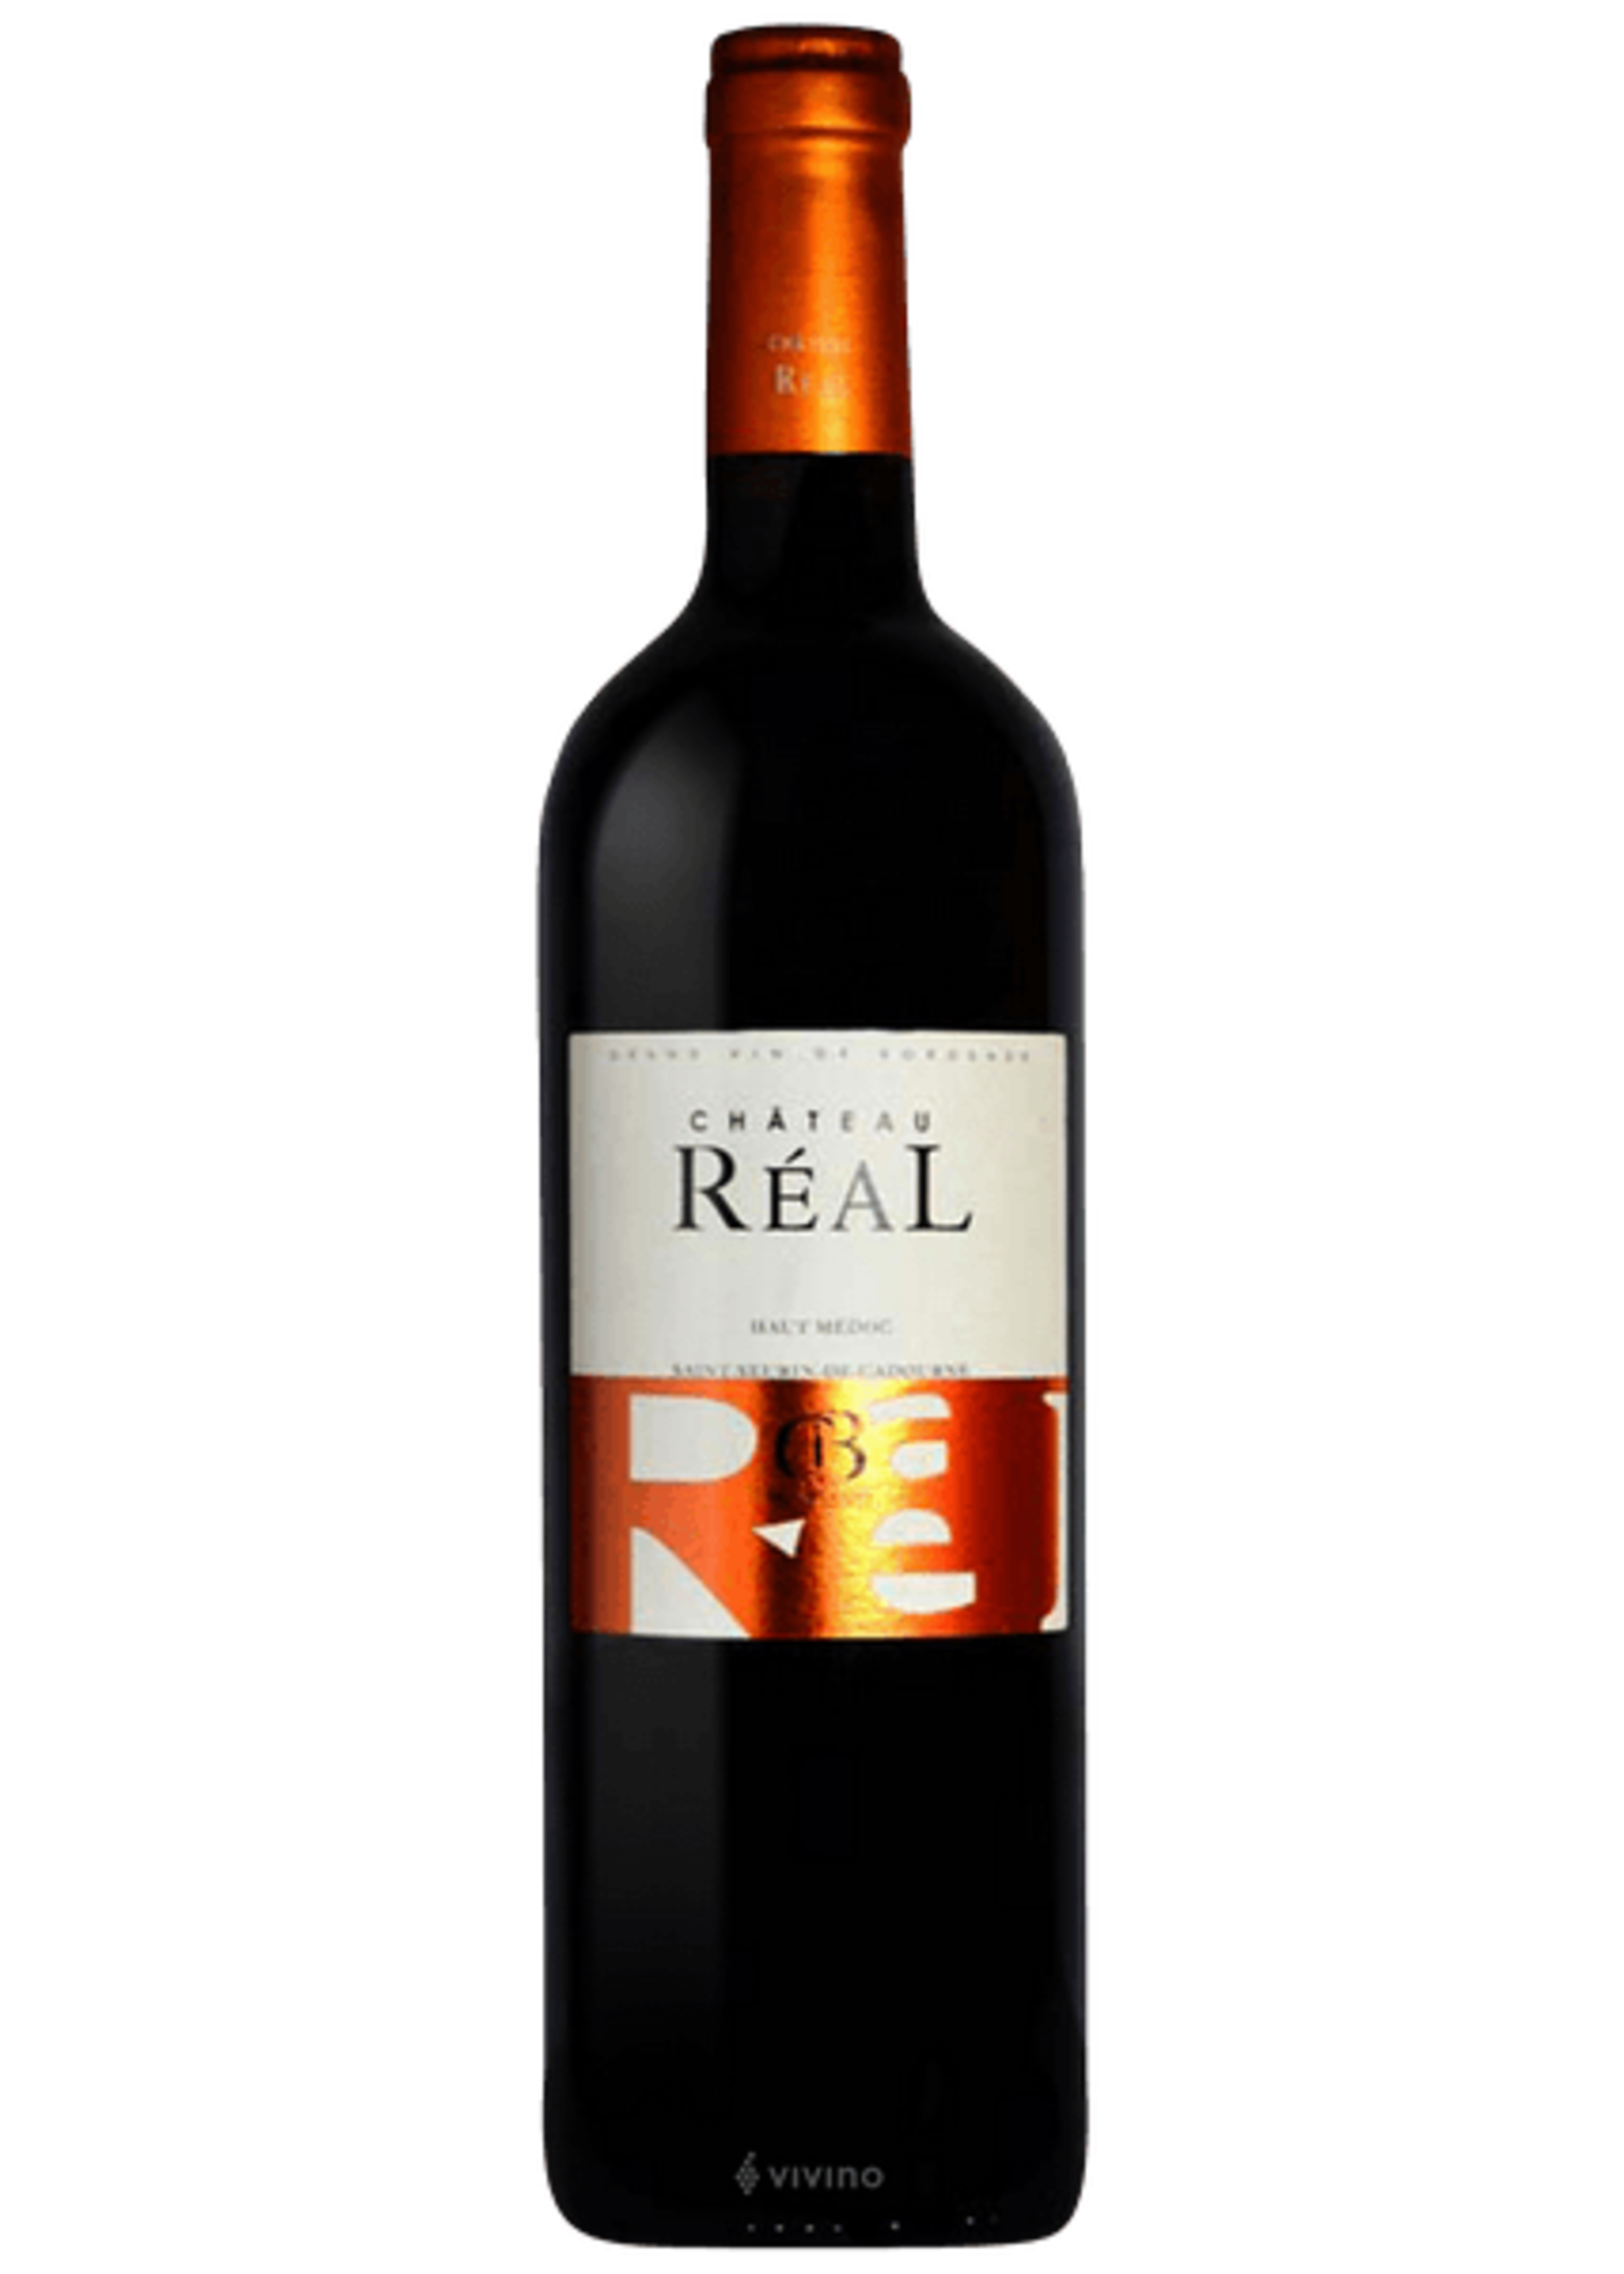 Chateau Real Chateau Real / Haut-Medoc 2019 / 750mL